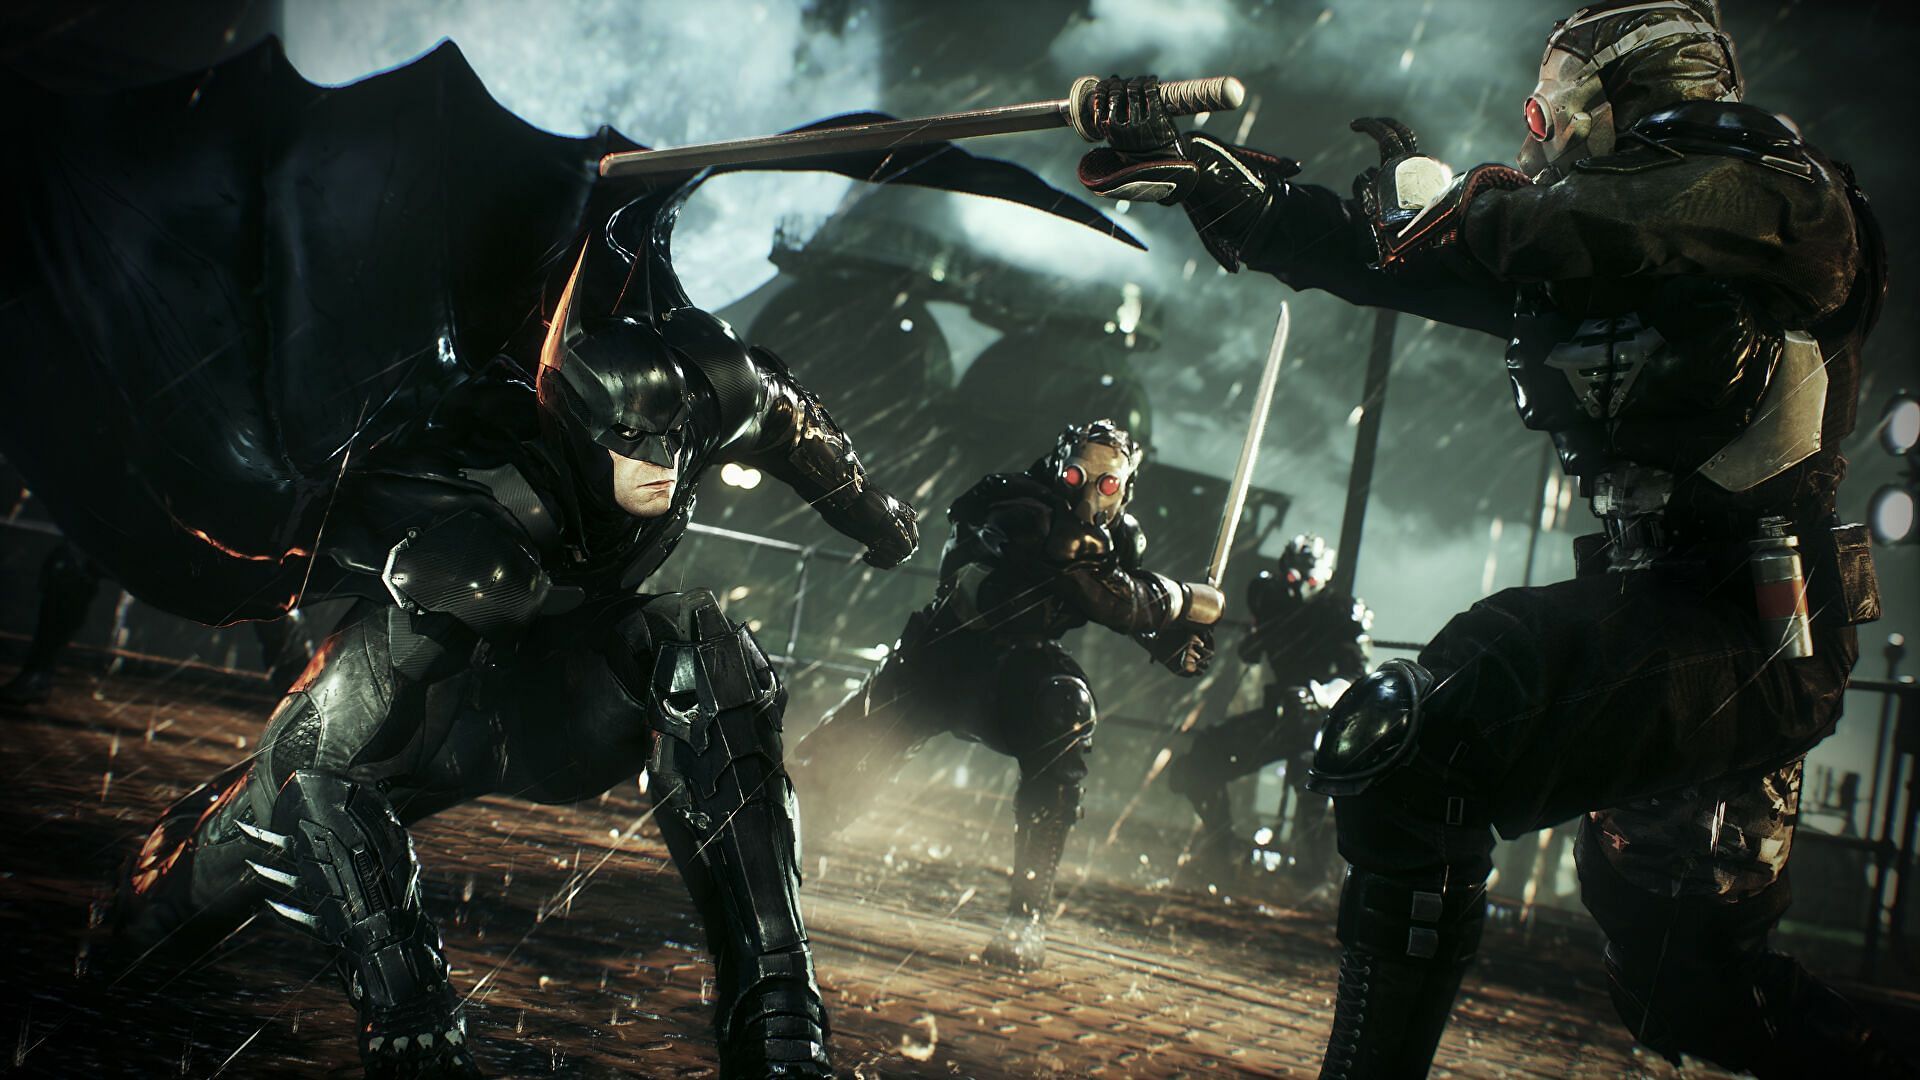 Batman engages a couple of ninjas in combat (Image via Rocksteady)